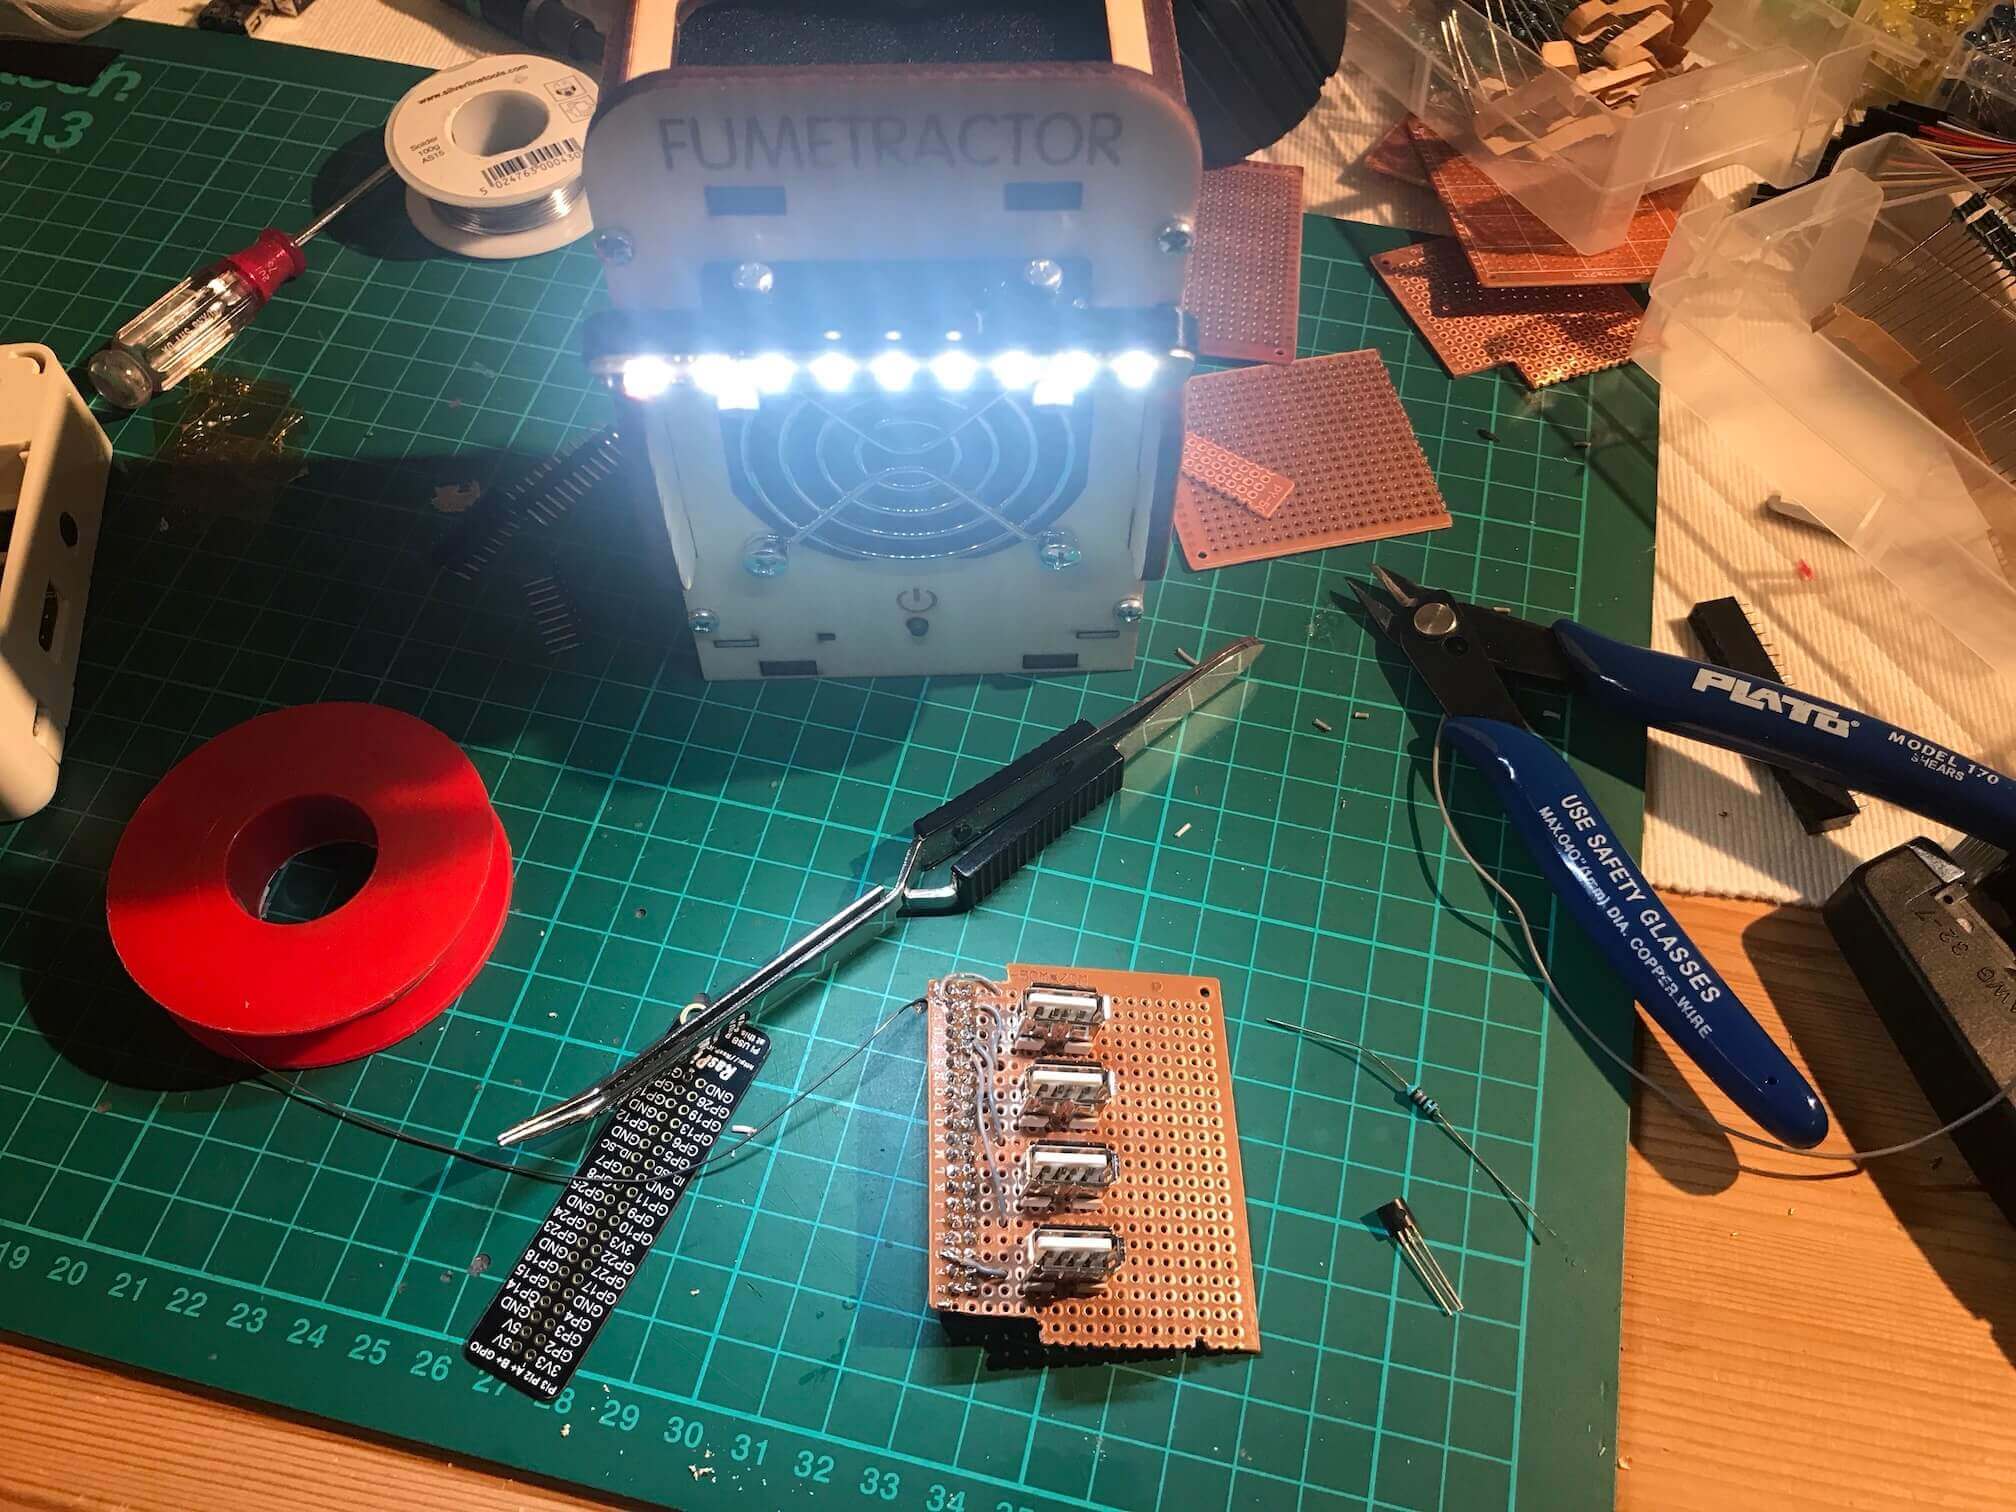 things with buzzers: Creating the custom printed circuit board.